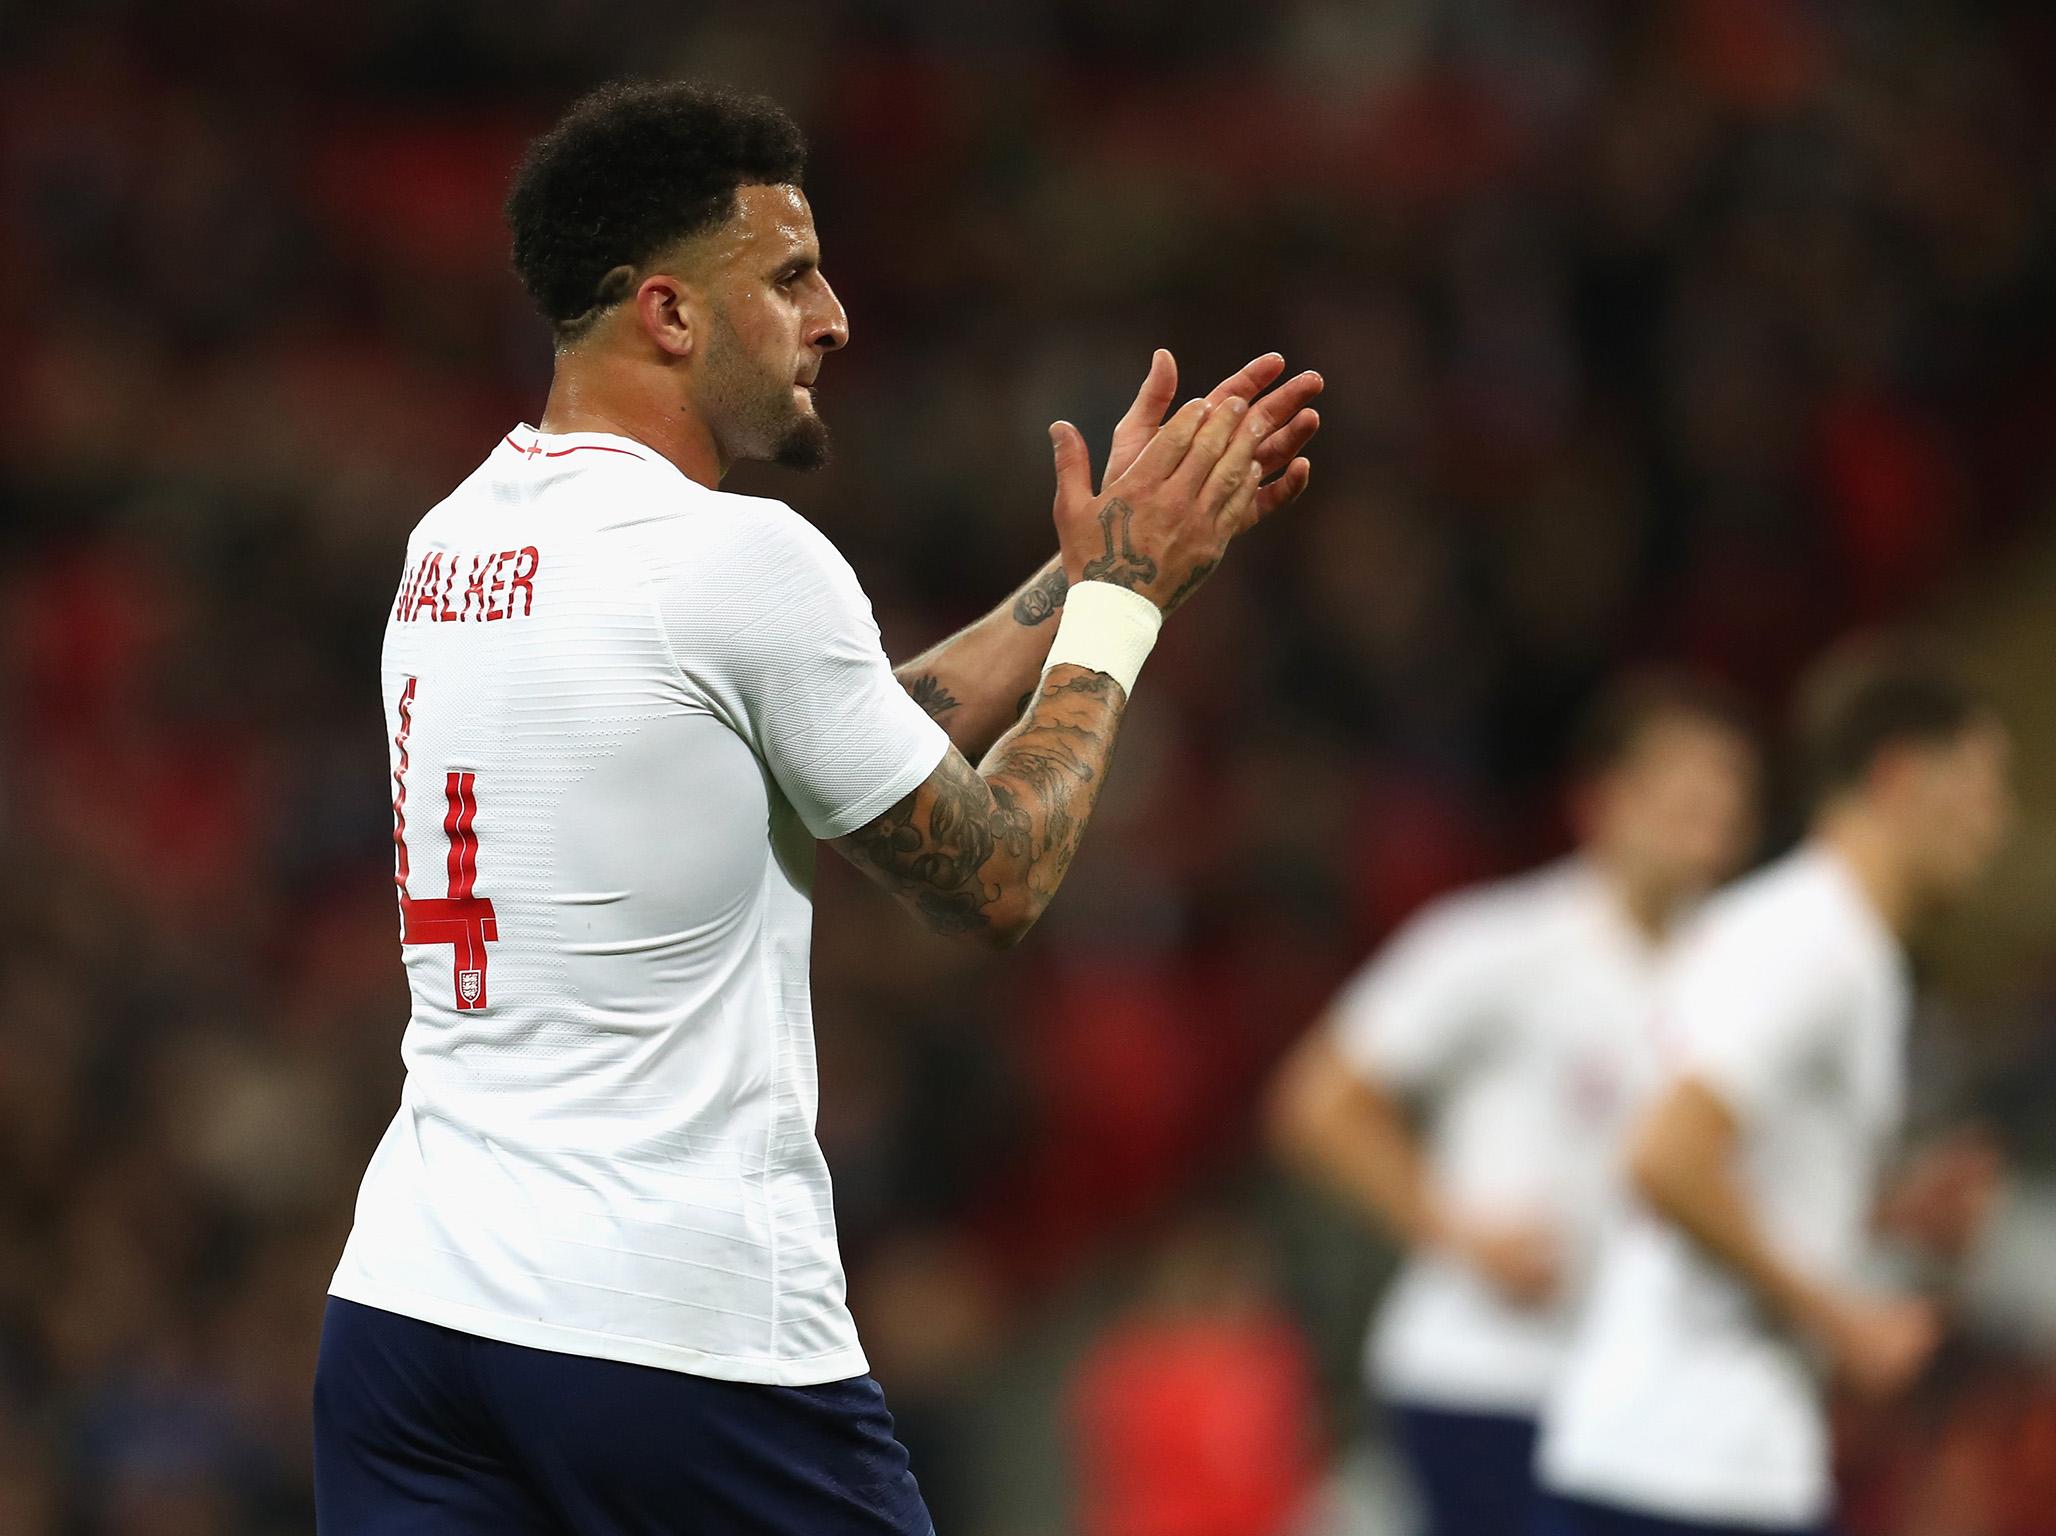 Gareth Southgate&apos;s innovative ploy to use Kyle Walker in England&apos;s back three seems to be working